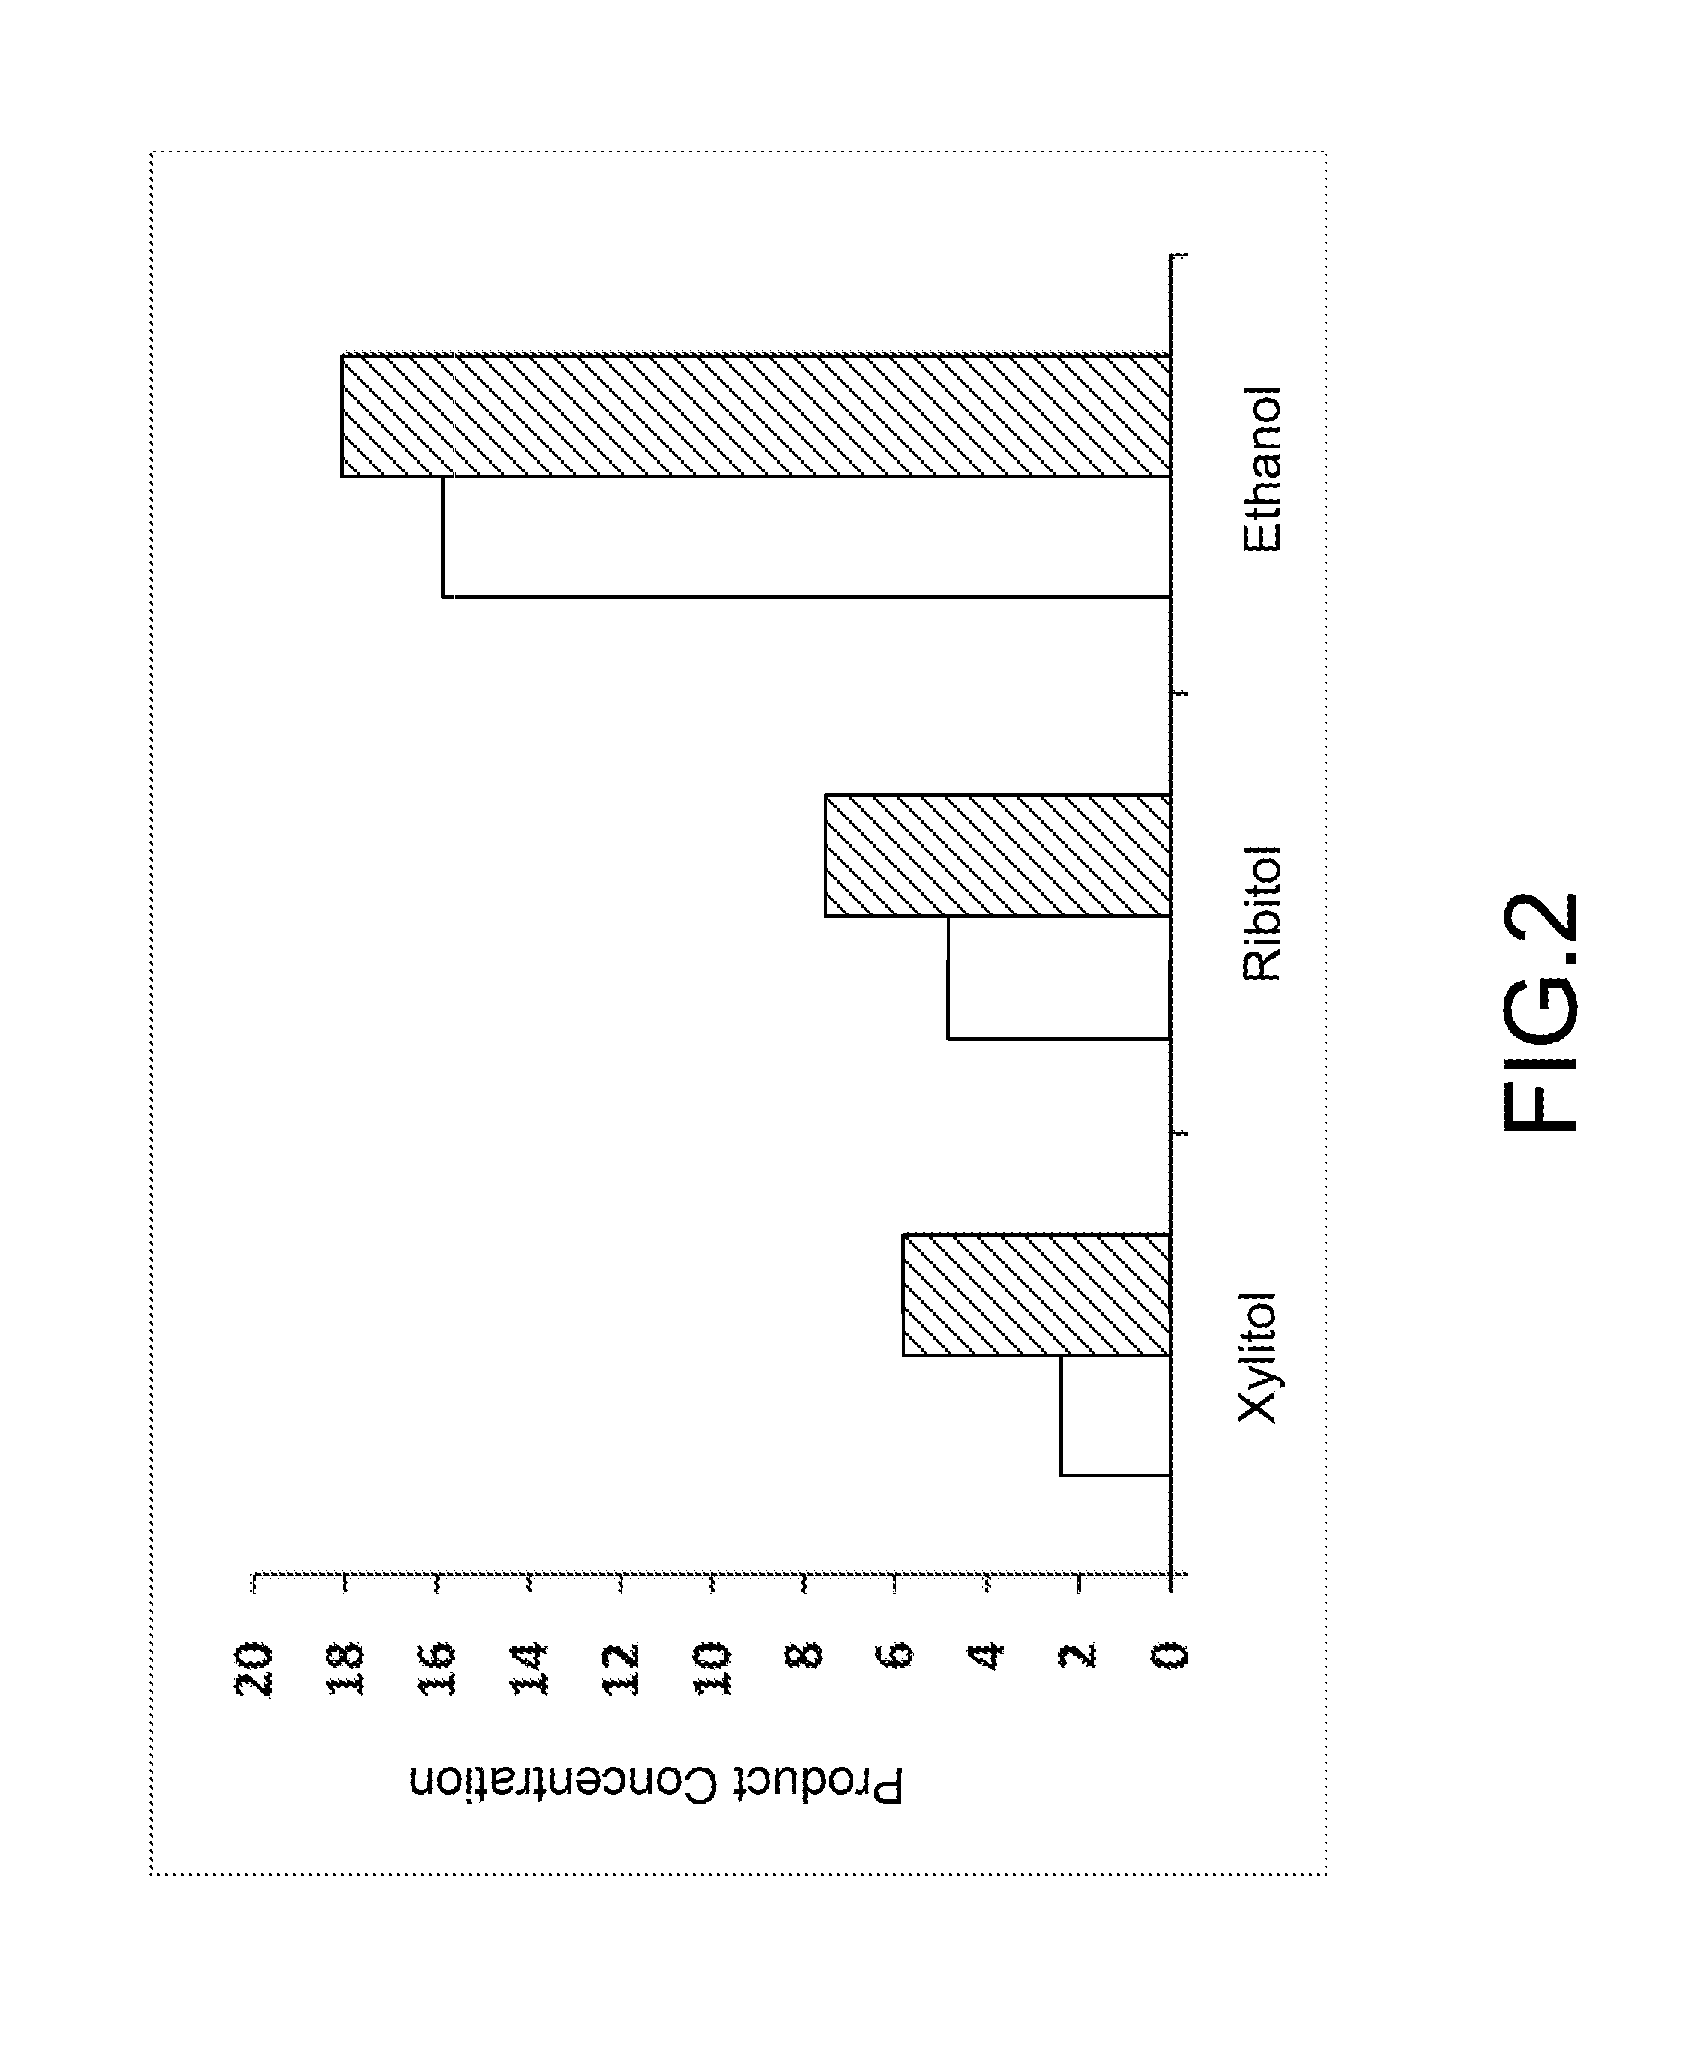 Method of cultivating yeast for enhancing pentitol production